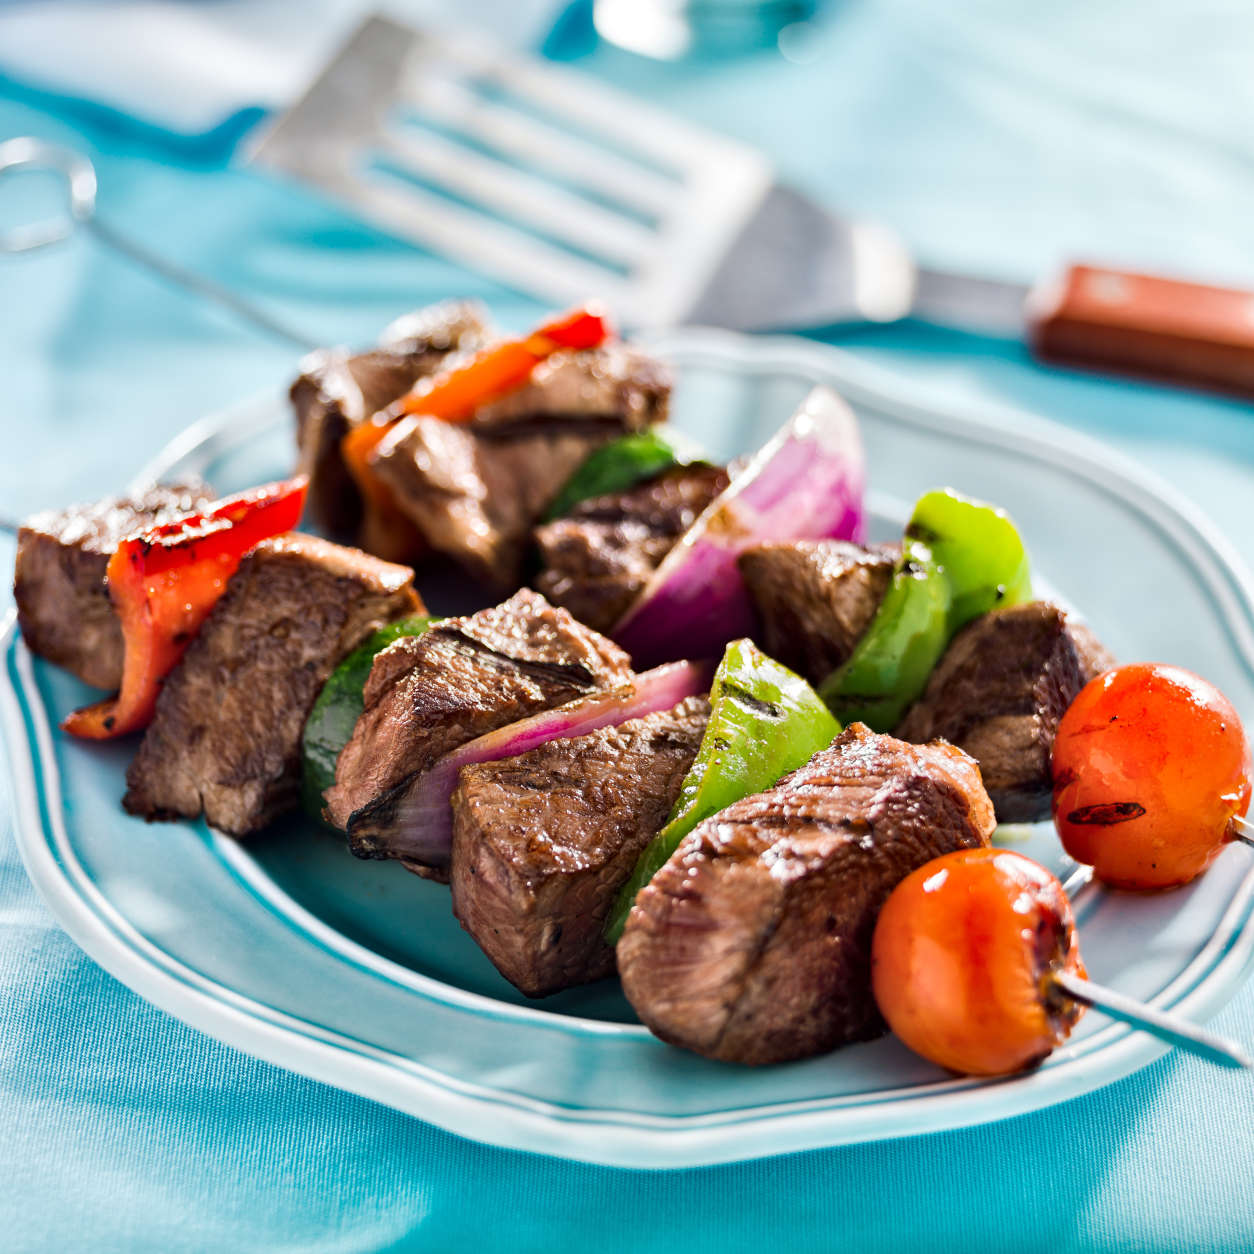 close up photo of grilled beef shishkabobs on table shot with selective focus. (Getty Images)